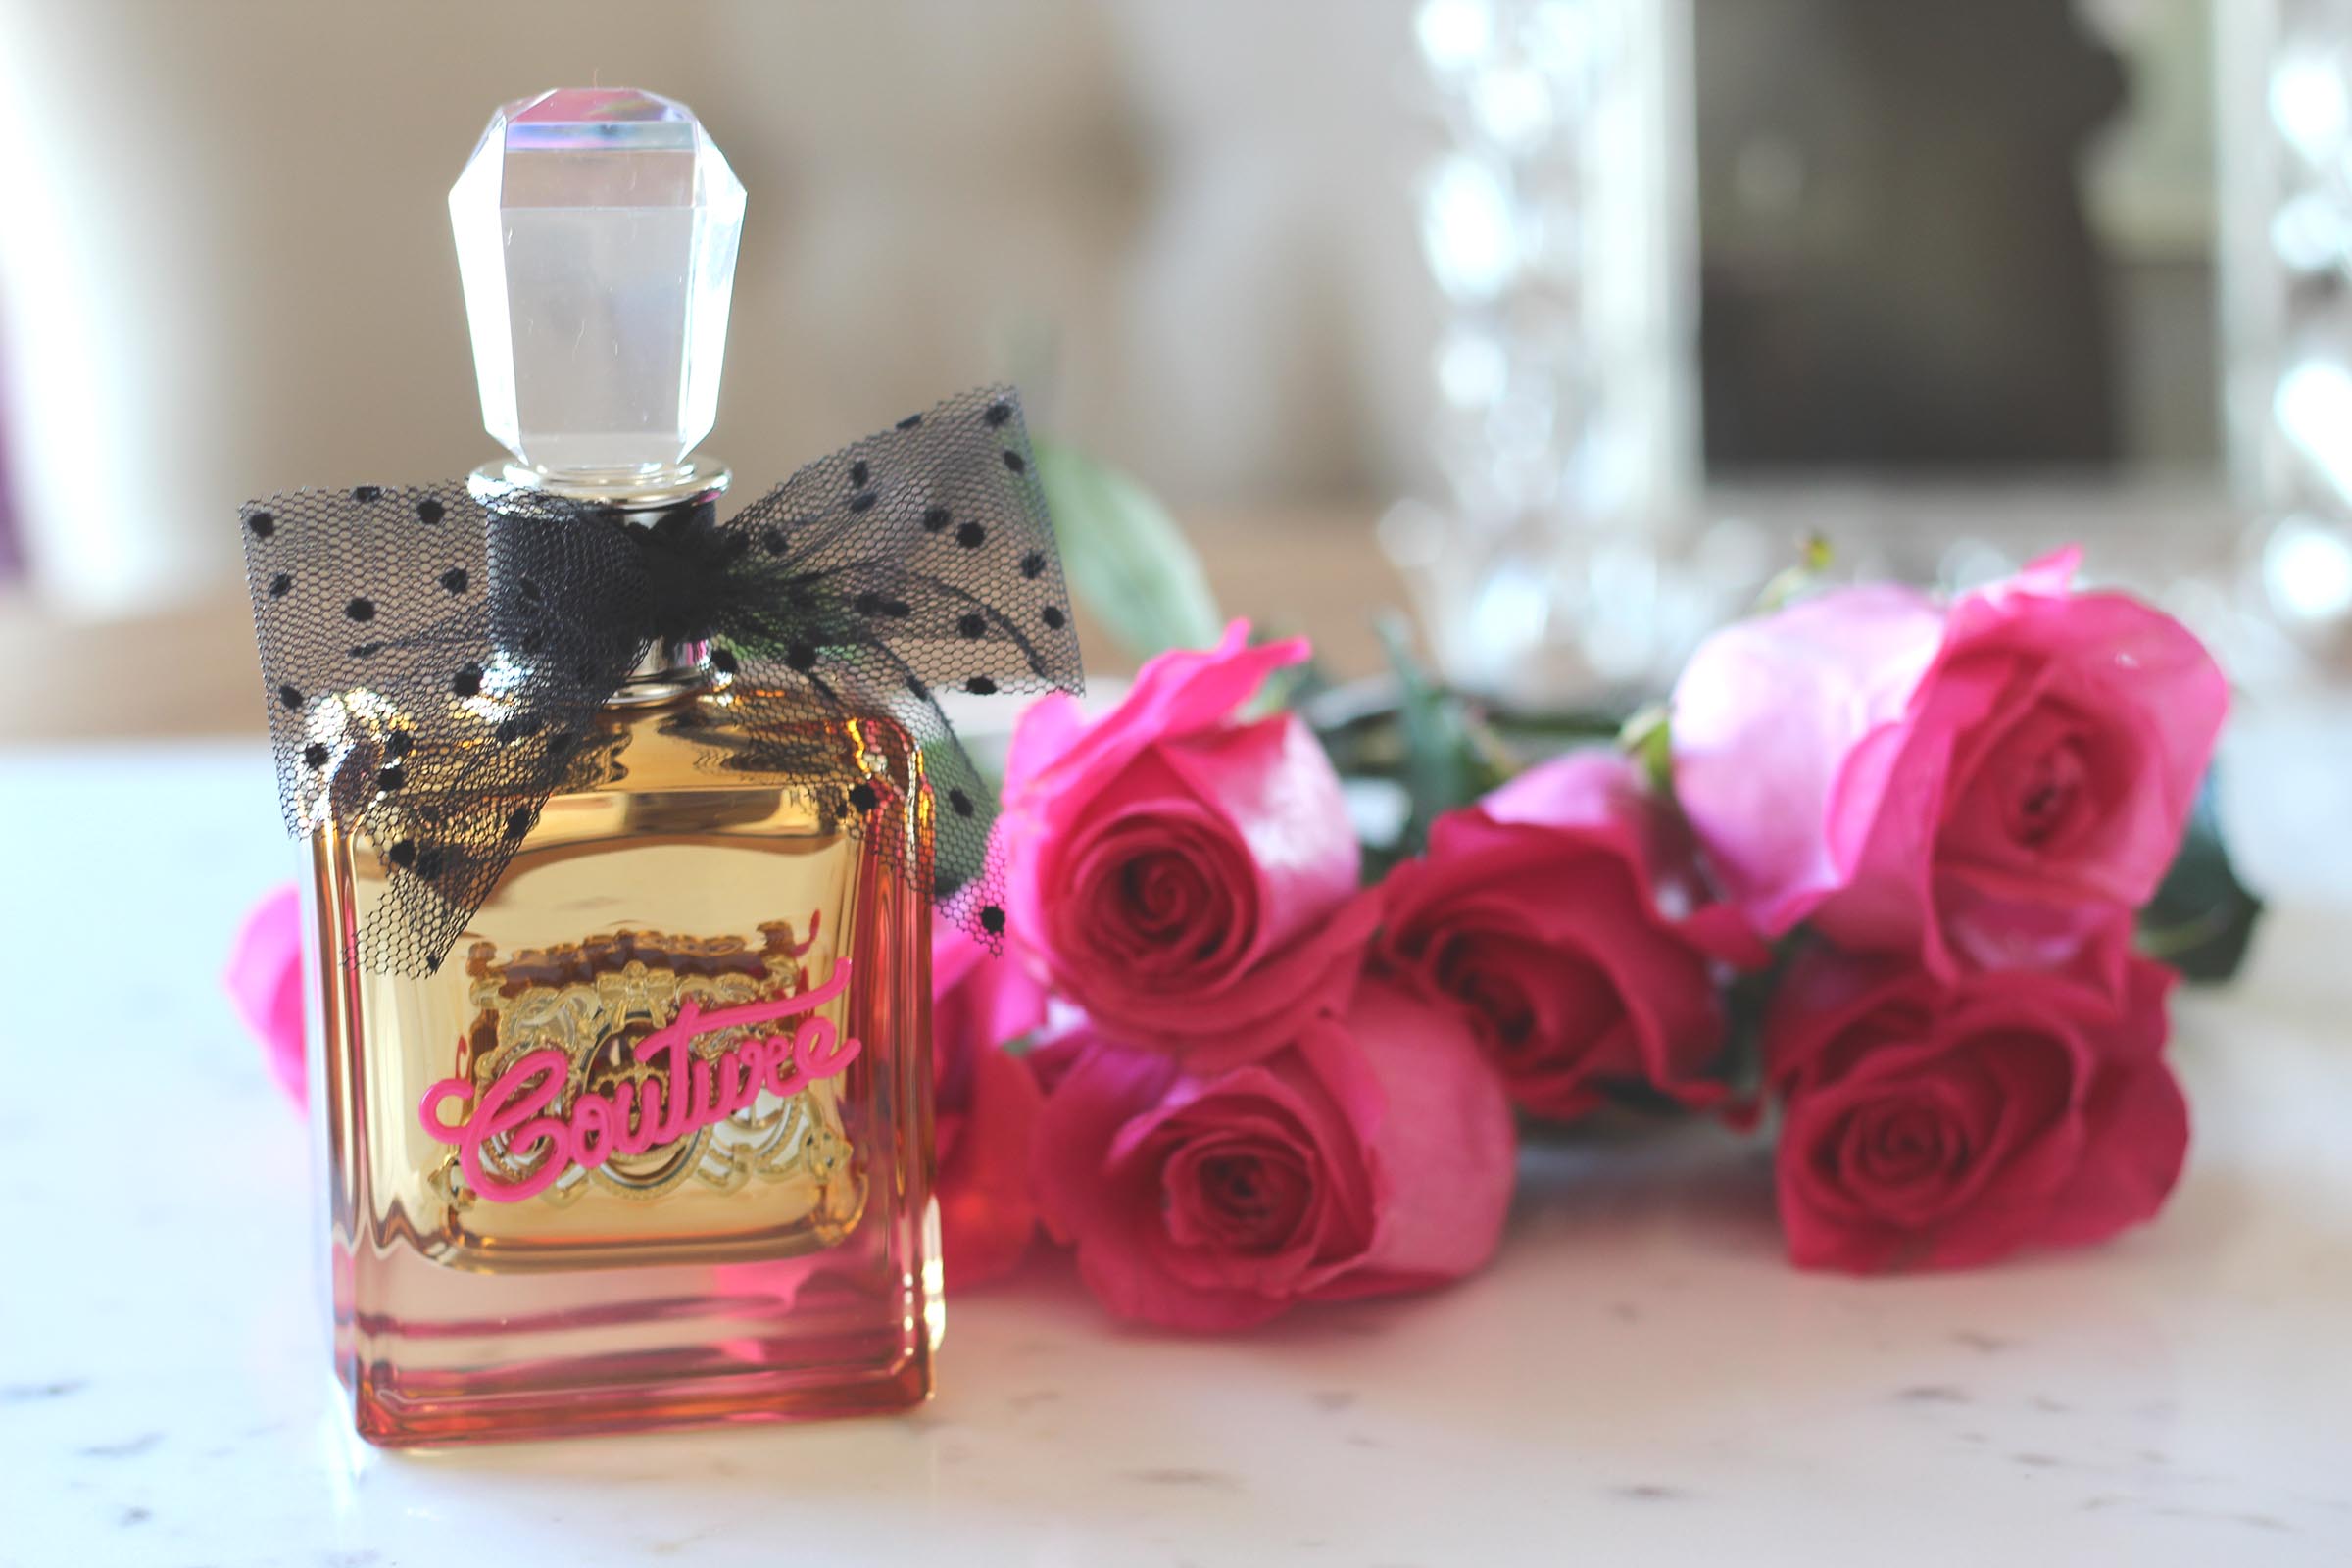 juicy couture fragrance